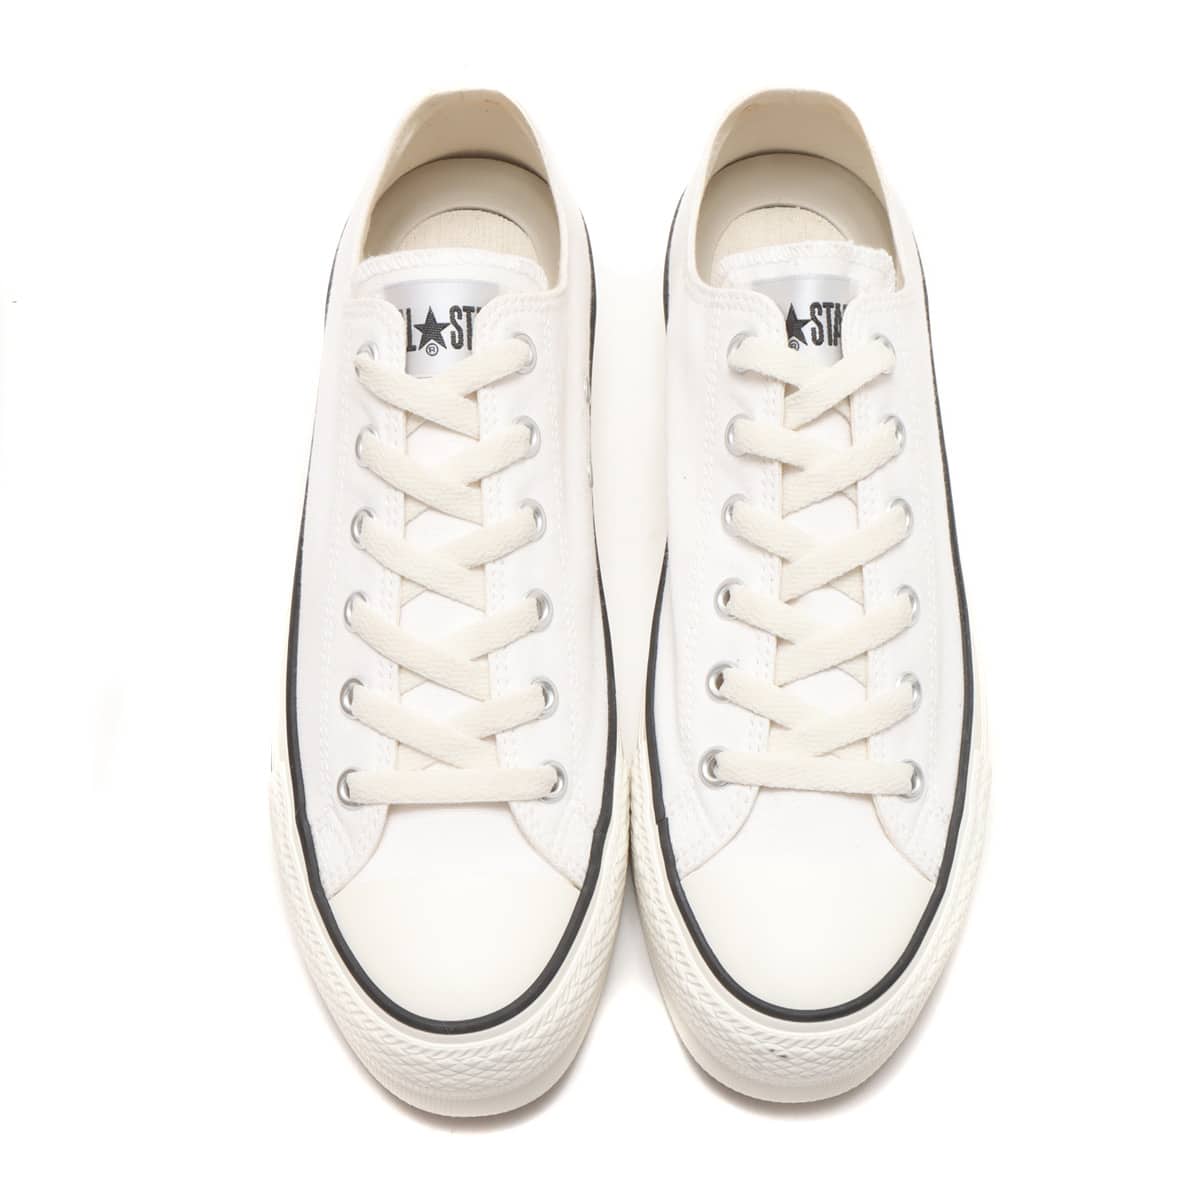 CONVERSE ALL STAR LIFTED OX WHITE FW I